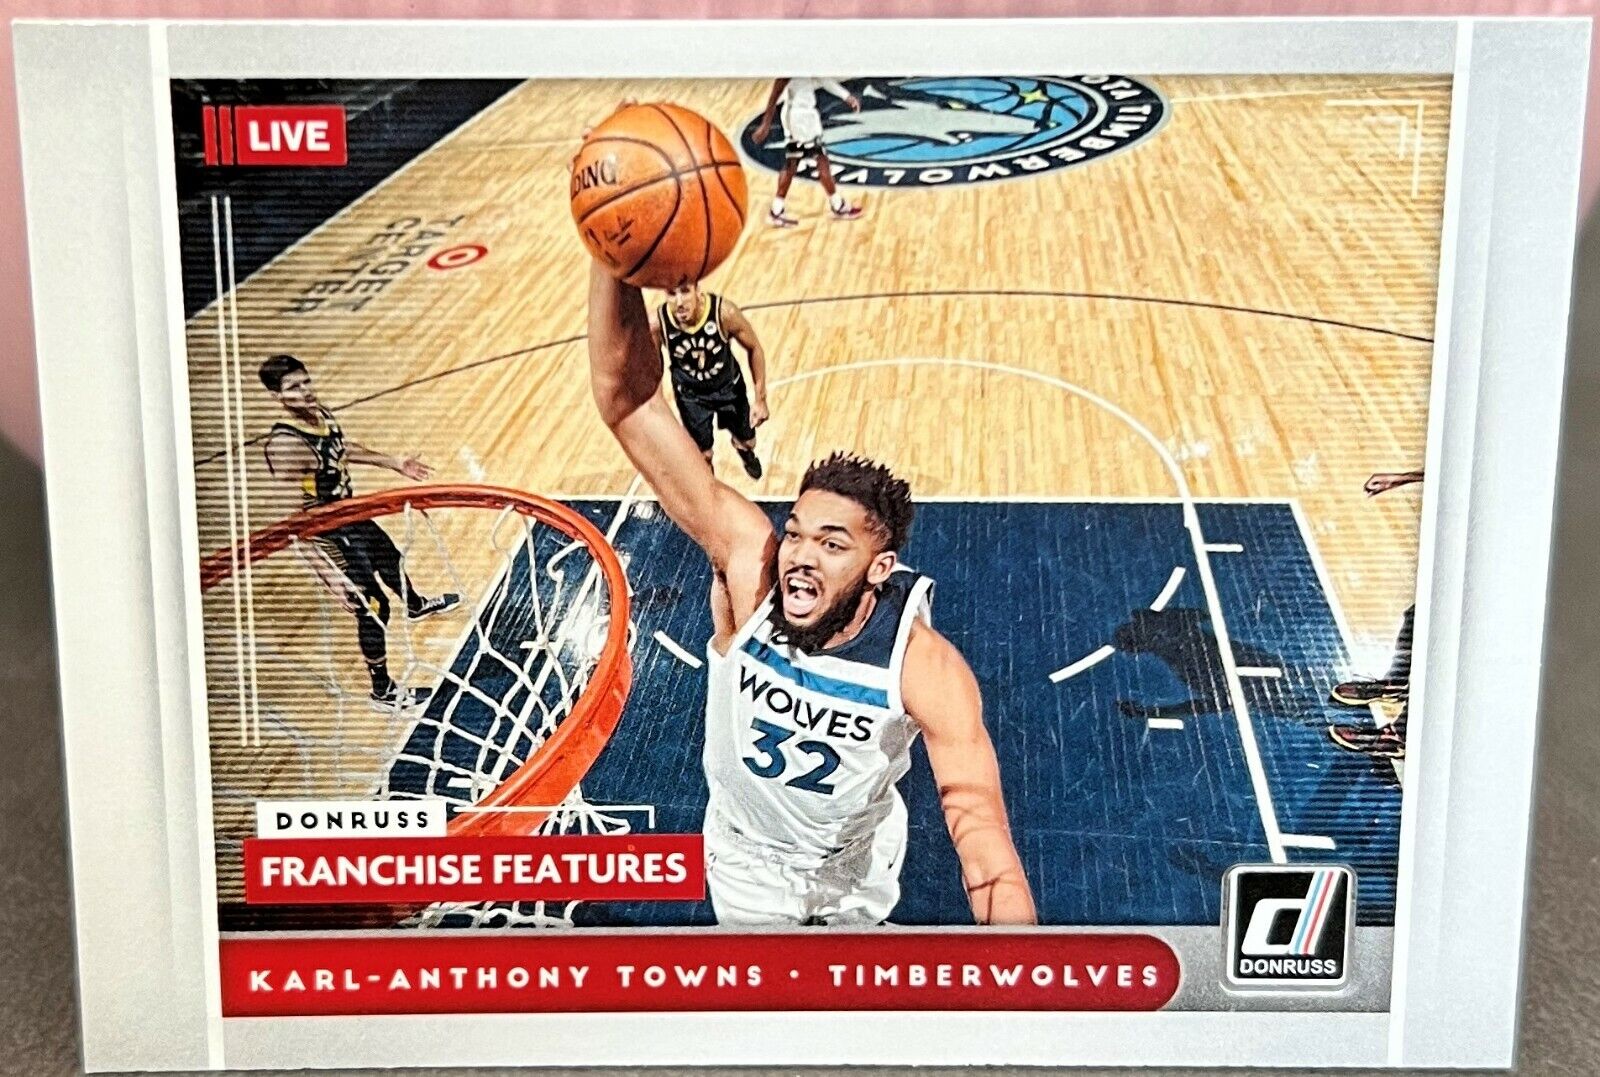 2021-22 Panini Donruss Franchise Features - Karl-Anthony Towns #16 Timberwolves